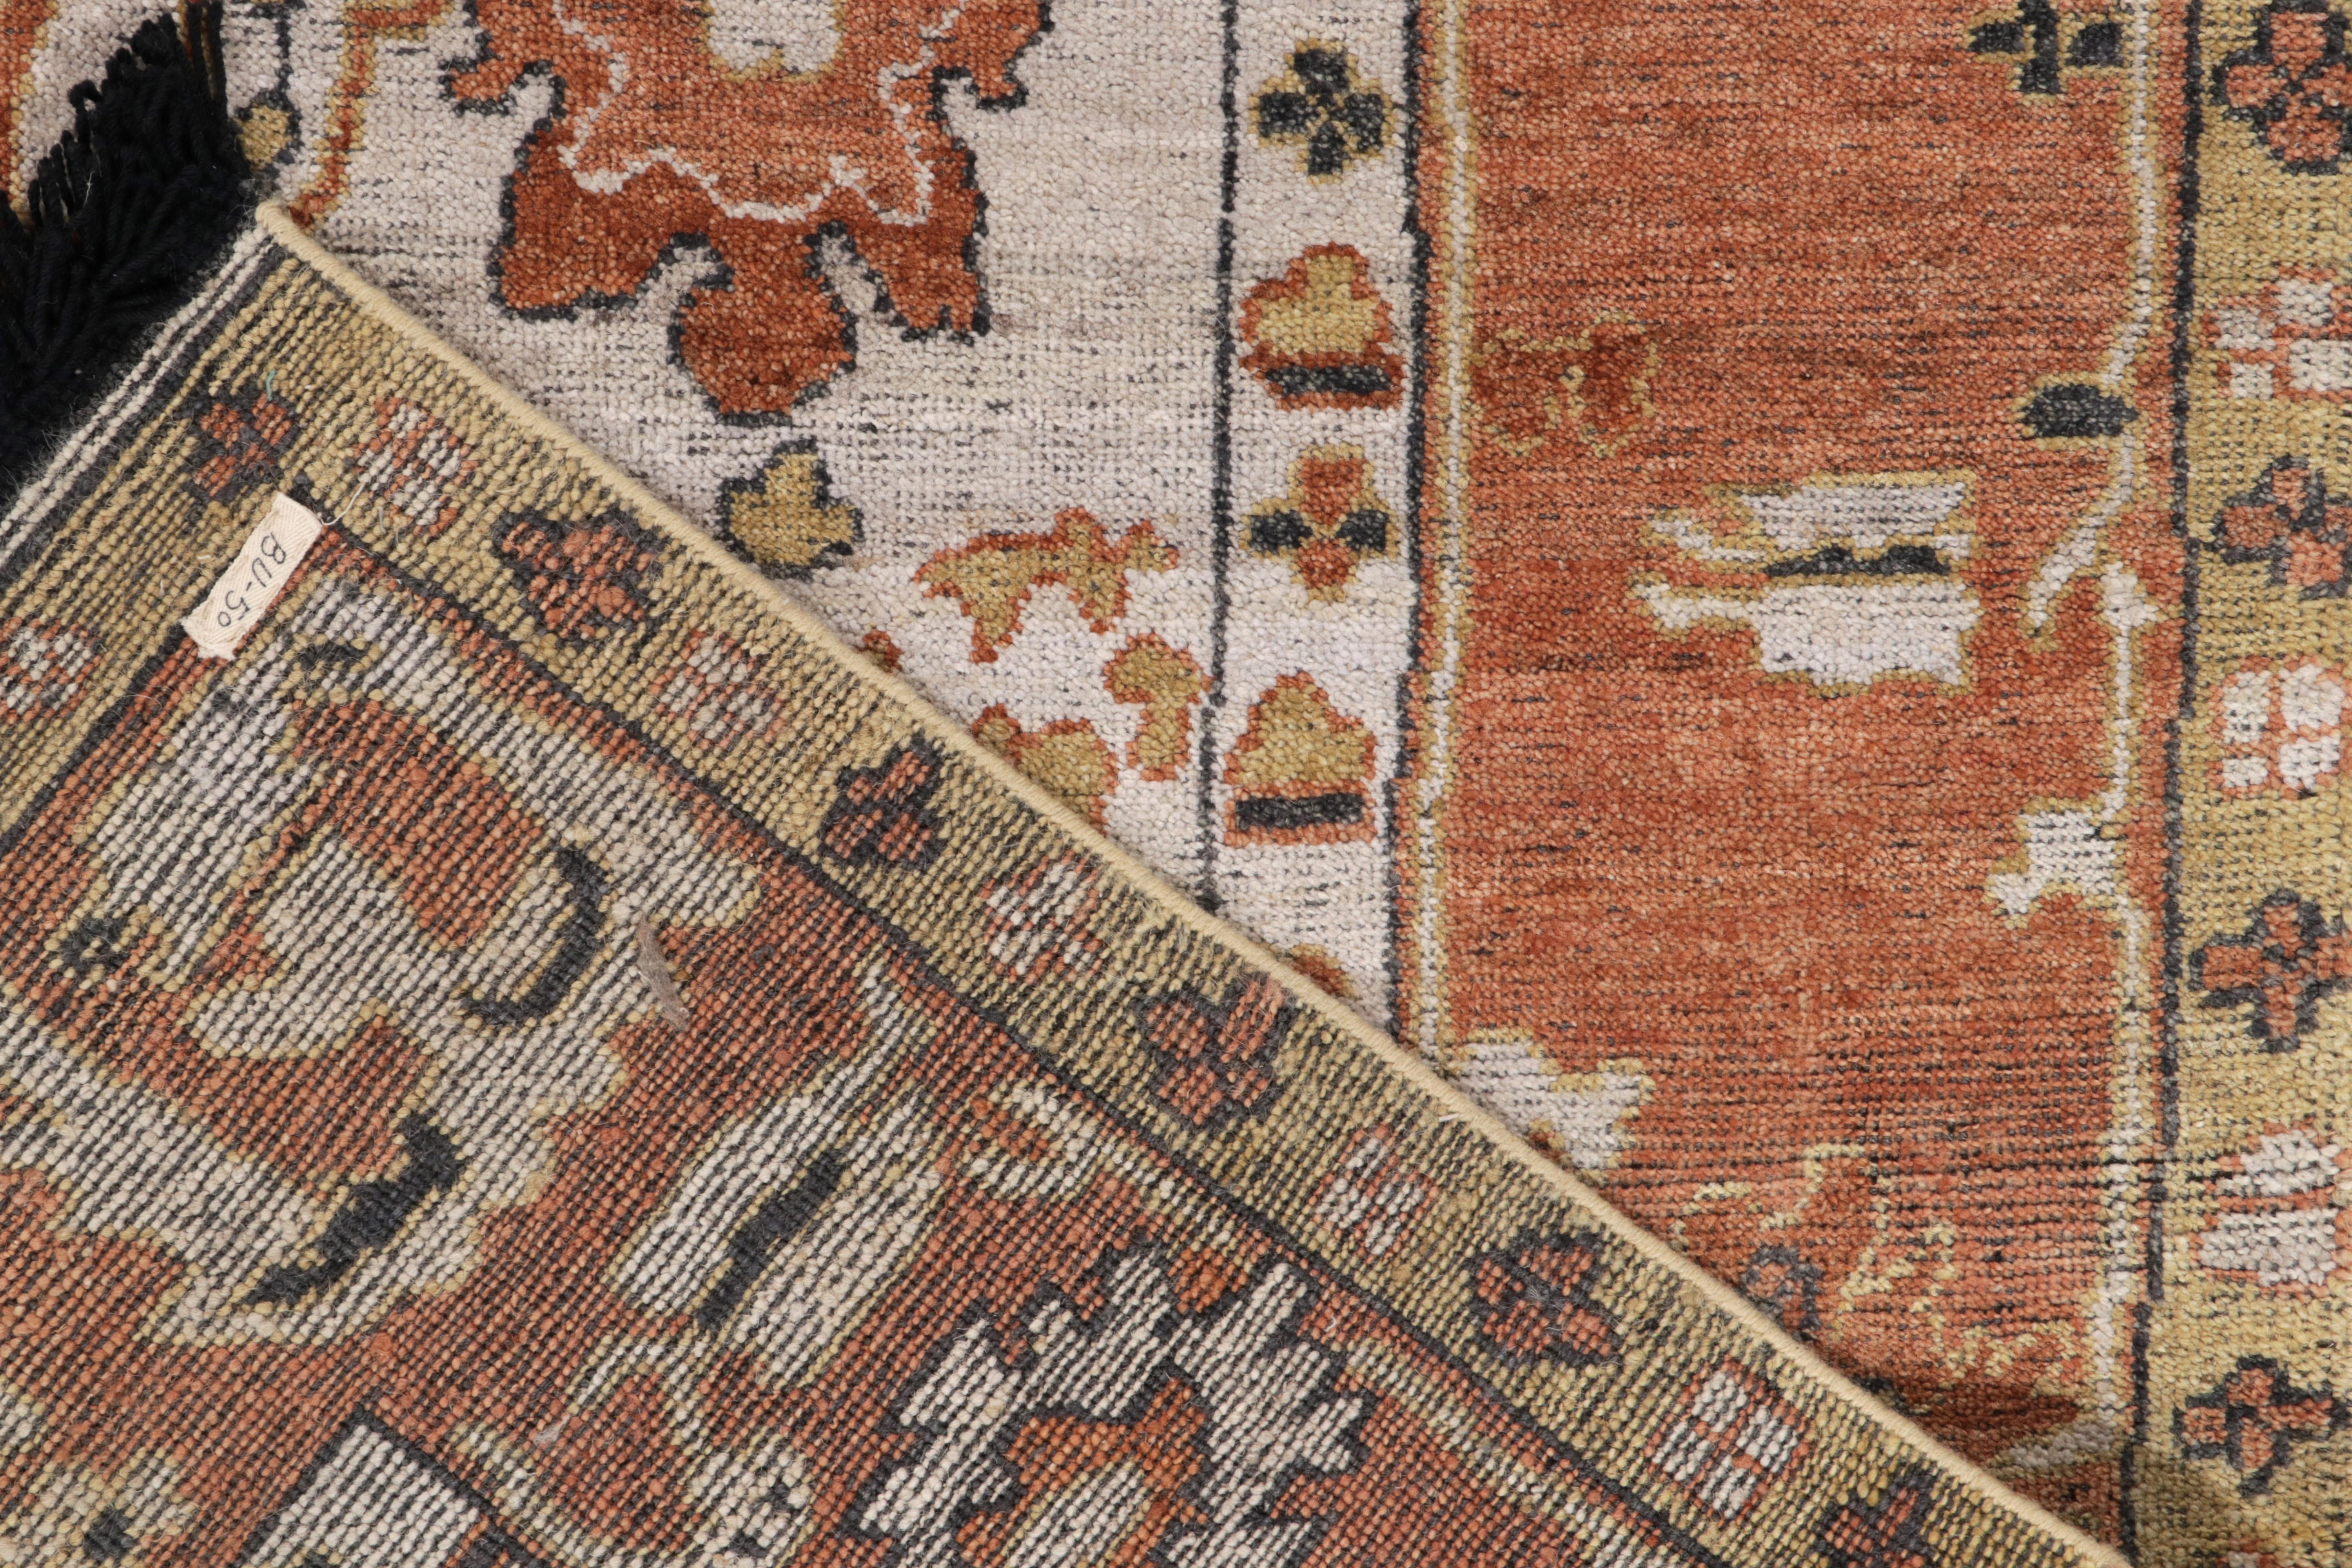 Rug & Kilim's 1900s Oushak Style Rug in White, Orange and Gold Floral Motif floral Neuf - En vente à Long Island City, NY